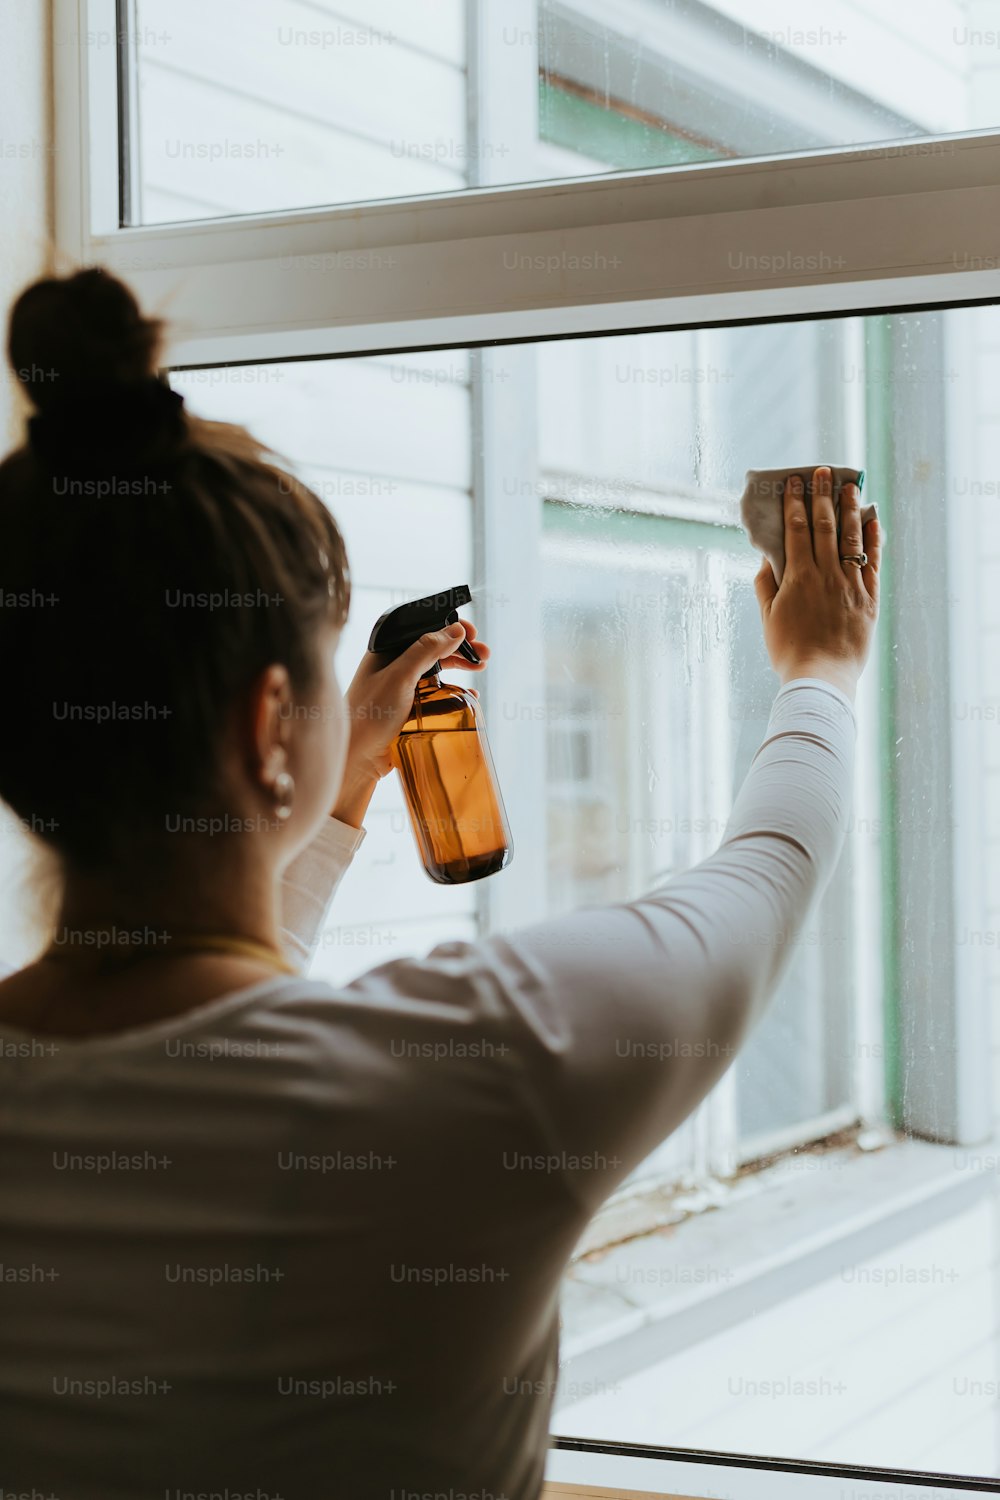 a woman is cleaning a window with a sprayer